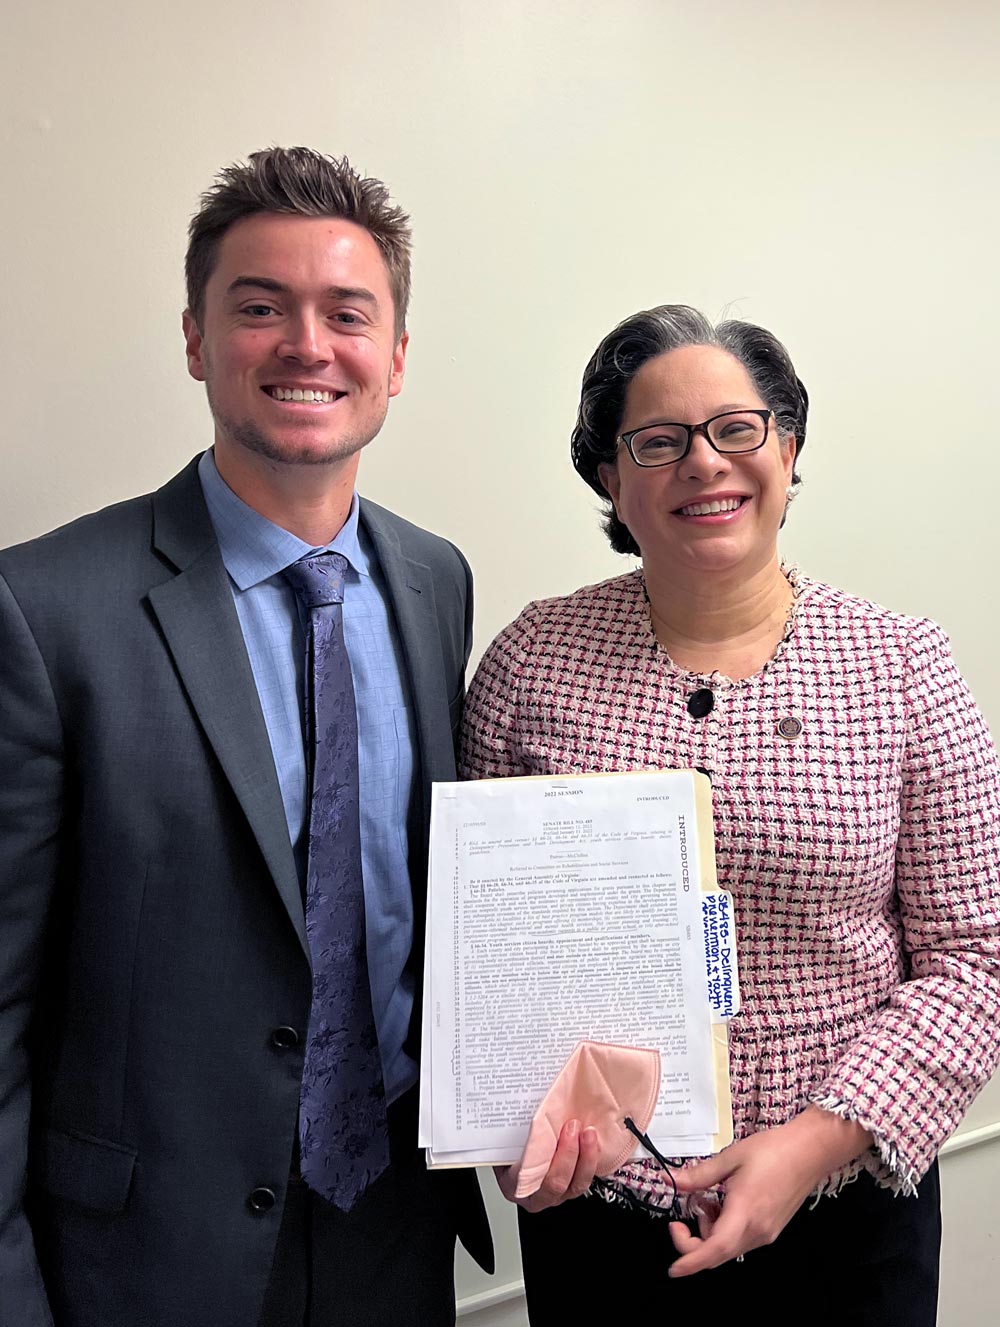 Nate Wunderli poses with Jennifer McClellan who is holding a document